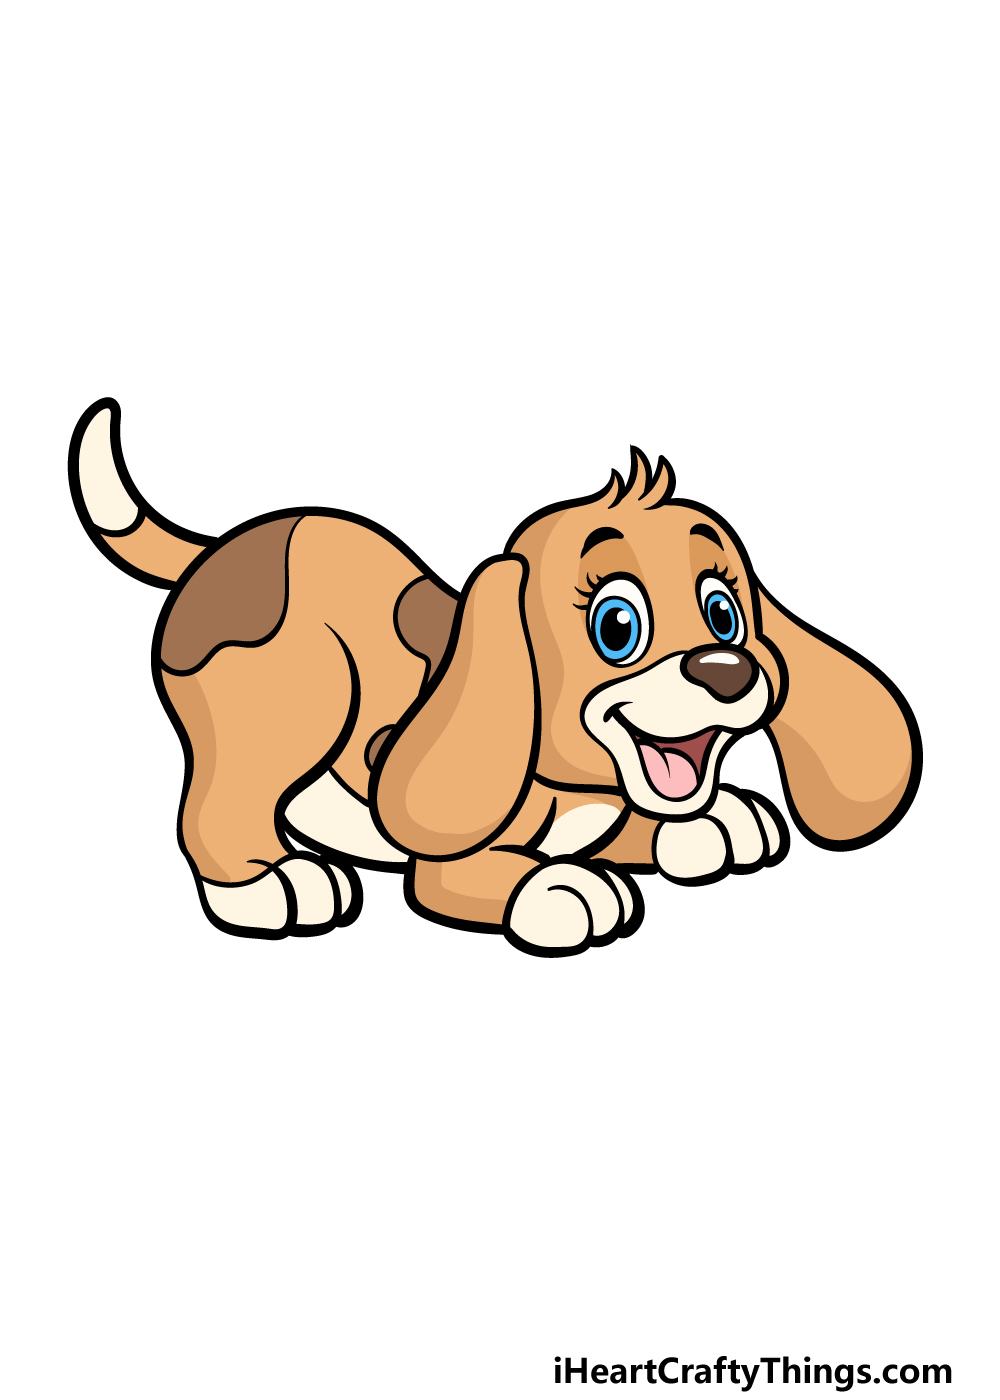 Cartoon Puppy Drawing - How To Draw A Cartoon Puppy Step By Step